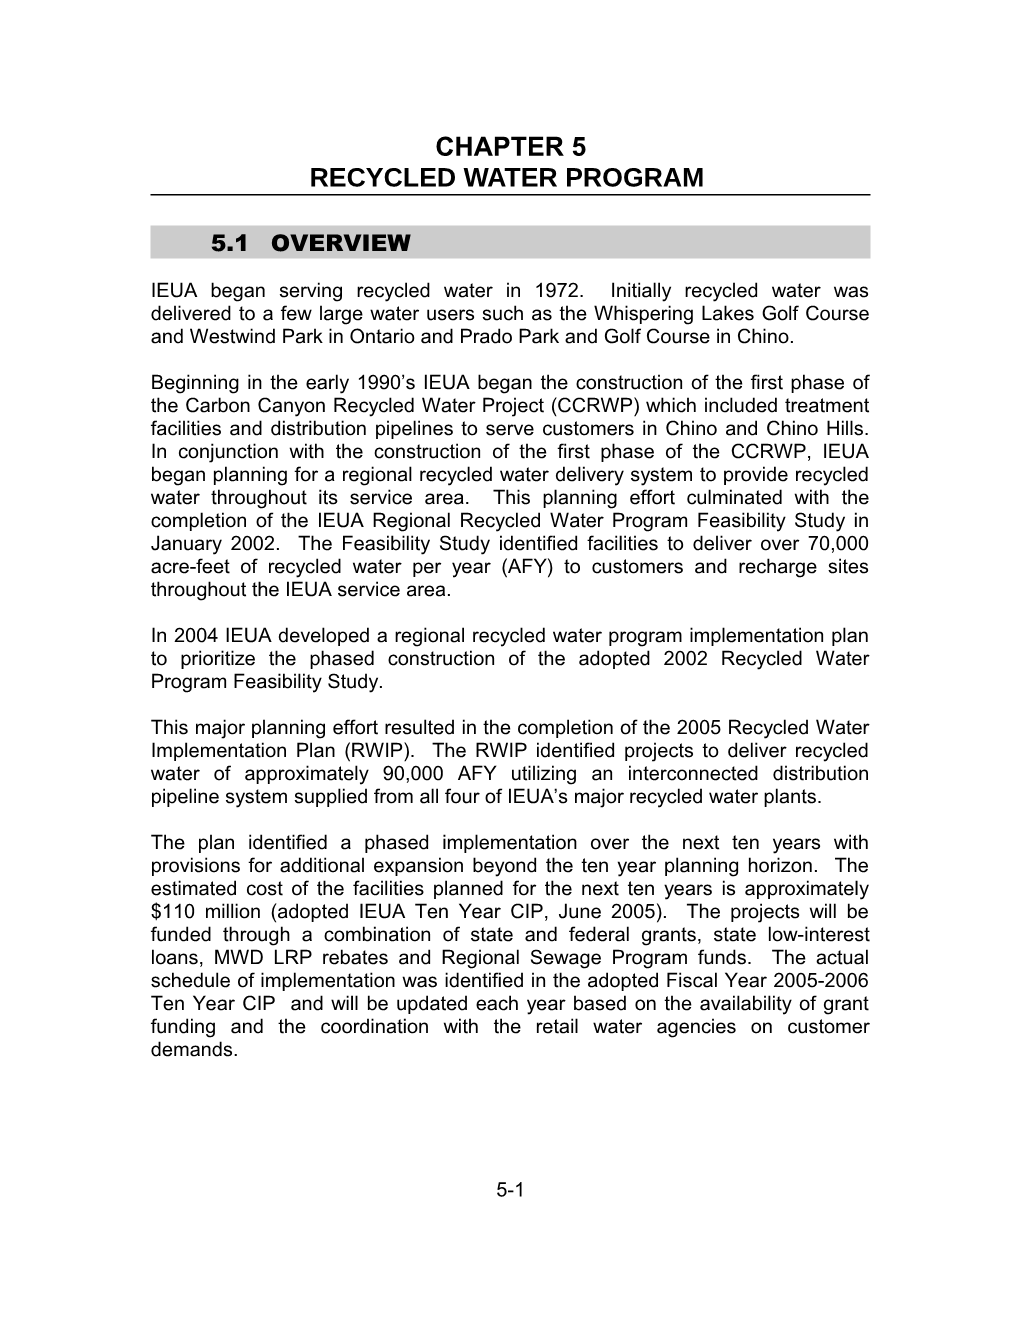 Chapter 5 Recycled Water Program